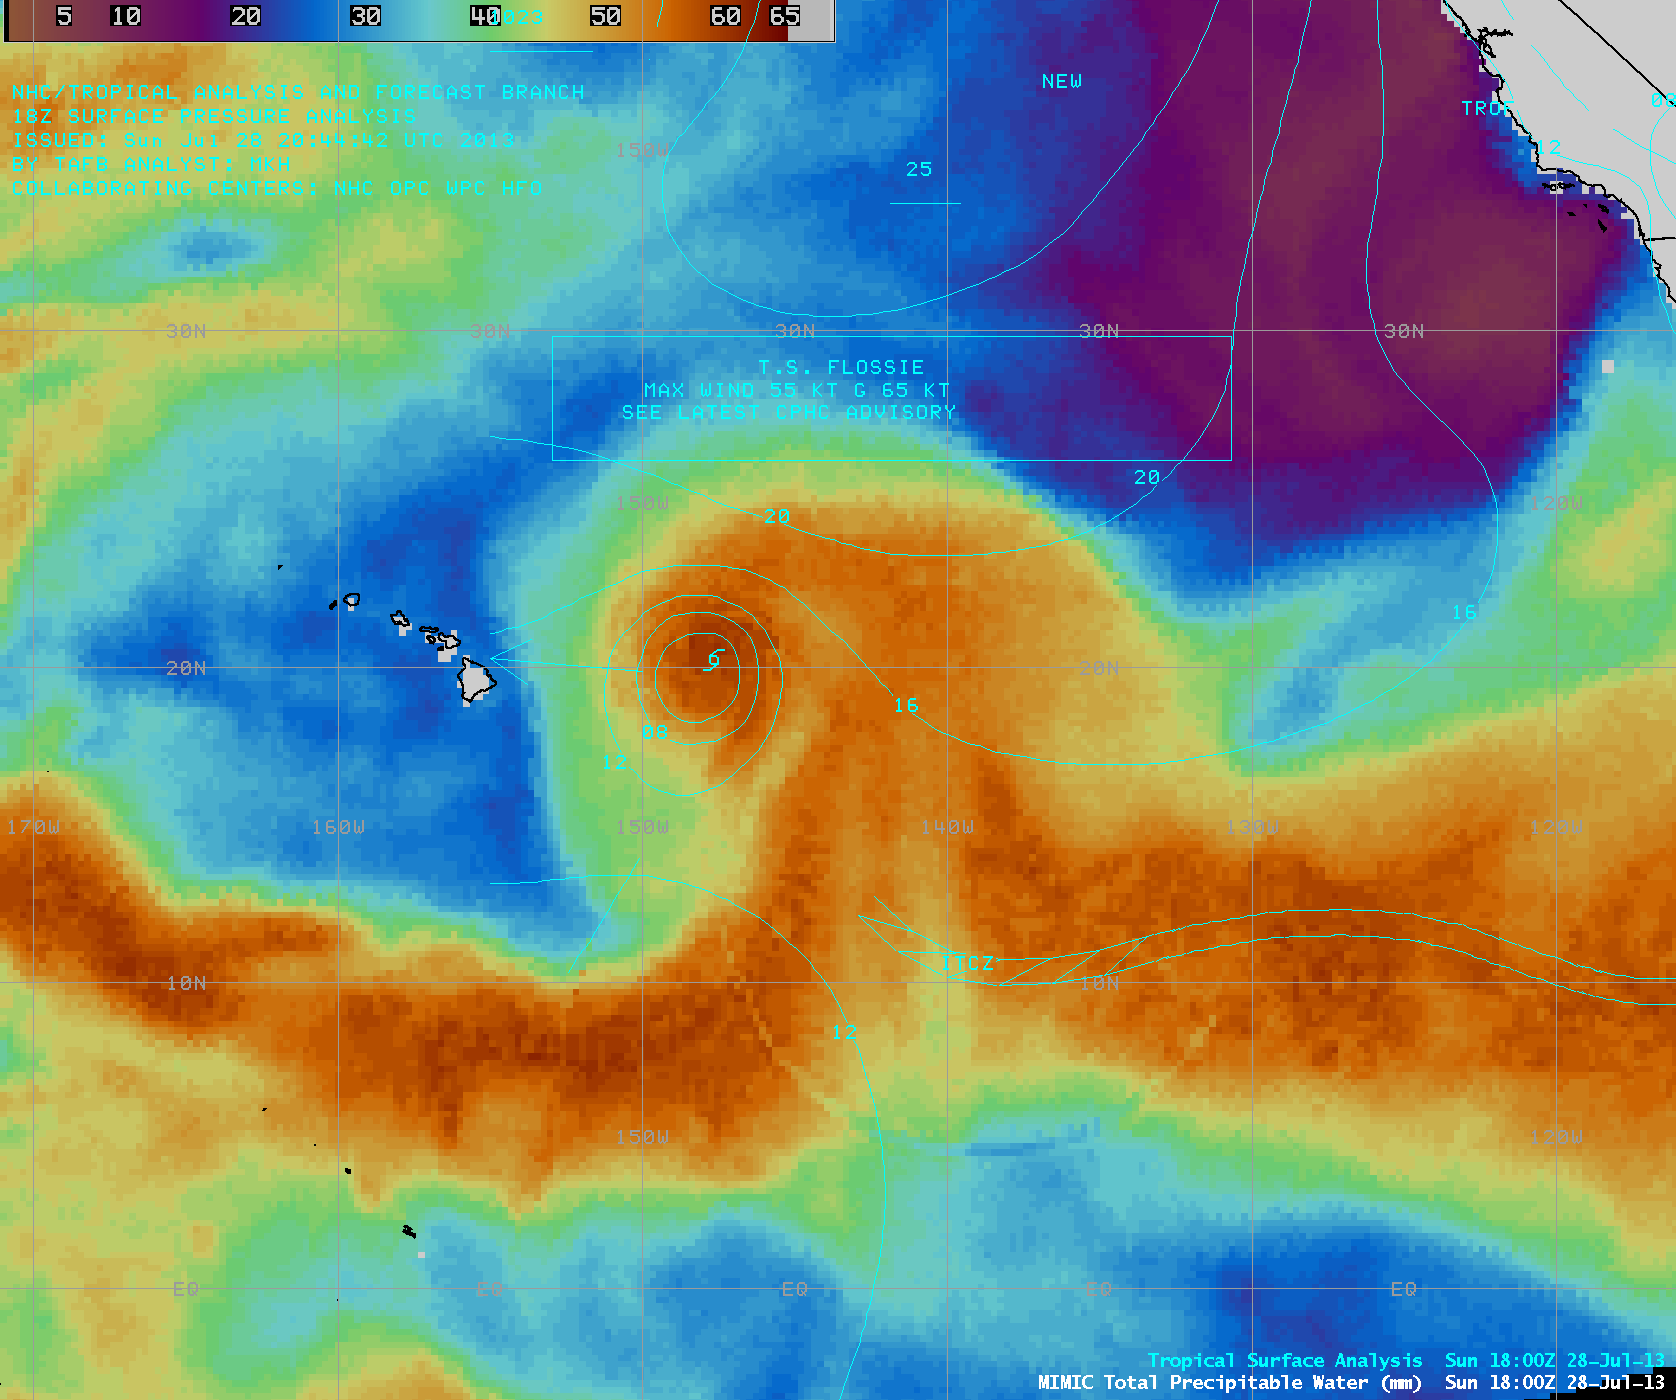 MIMIC Total Precipitable Water product with surface analyses